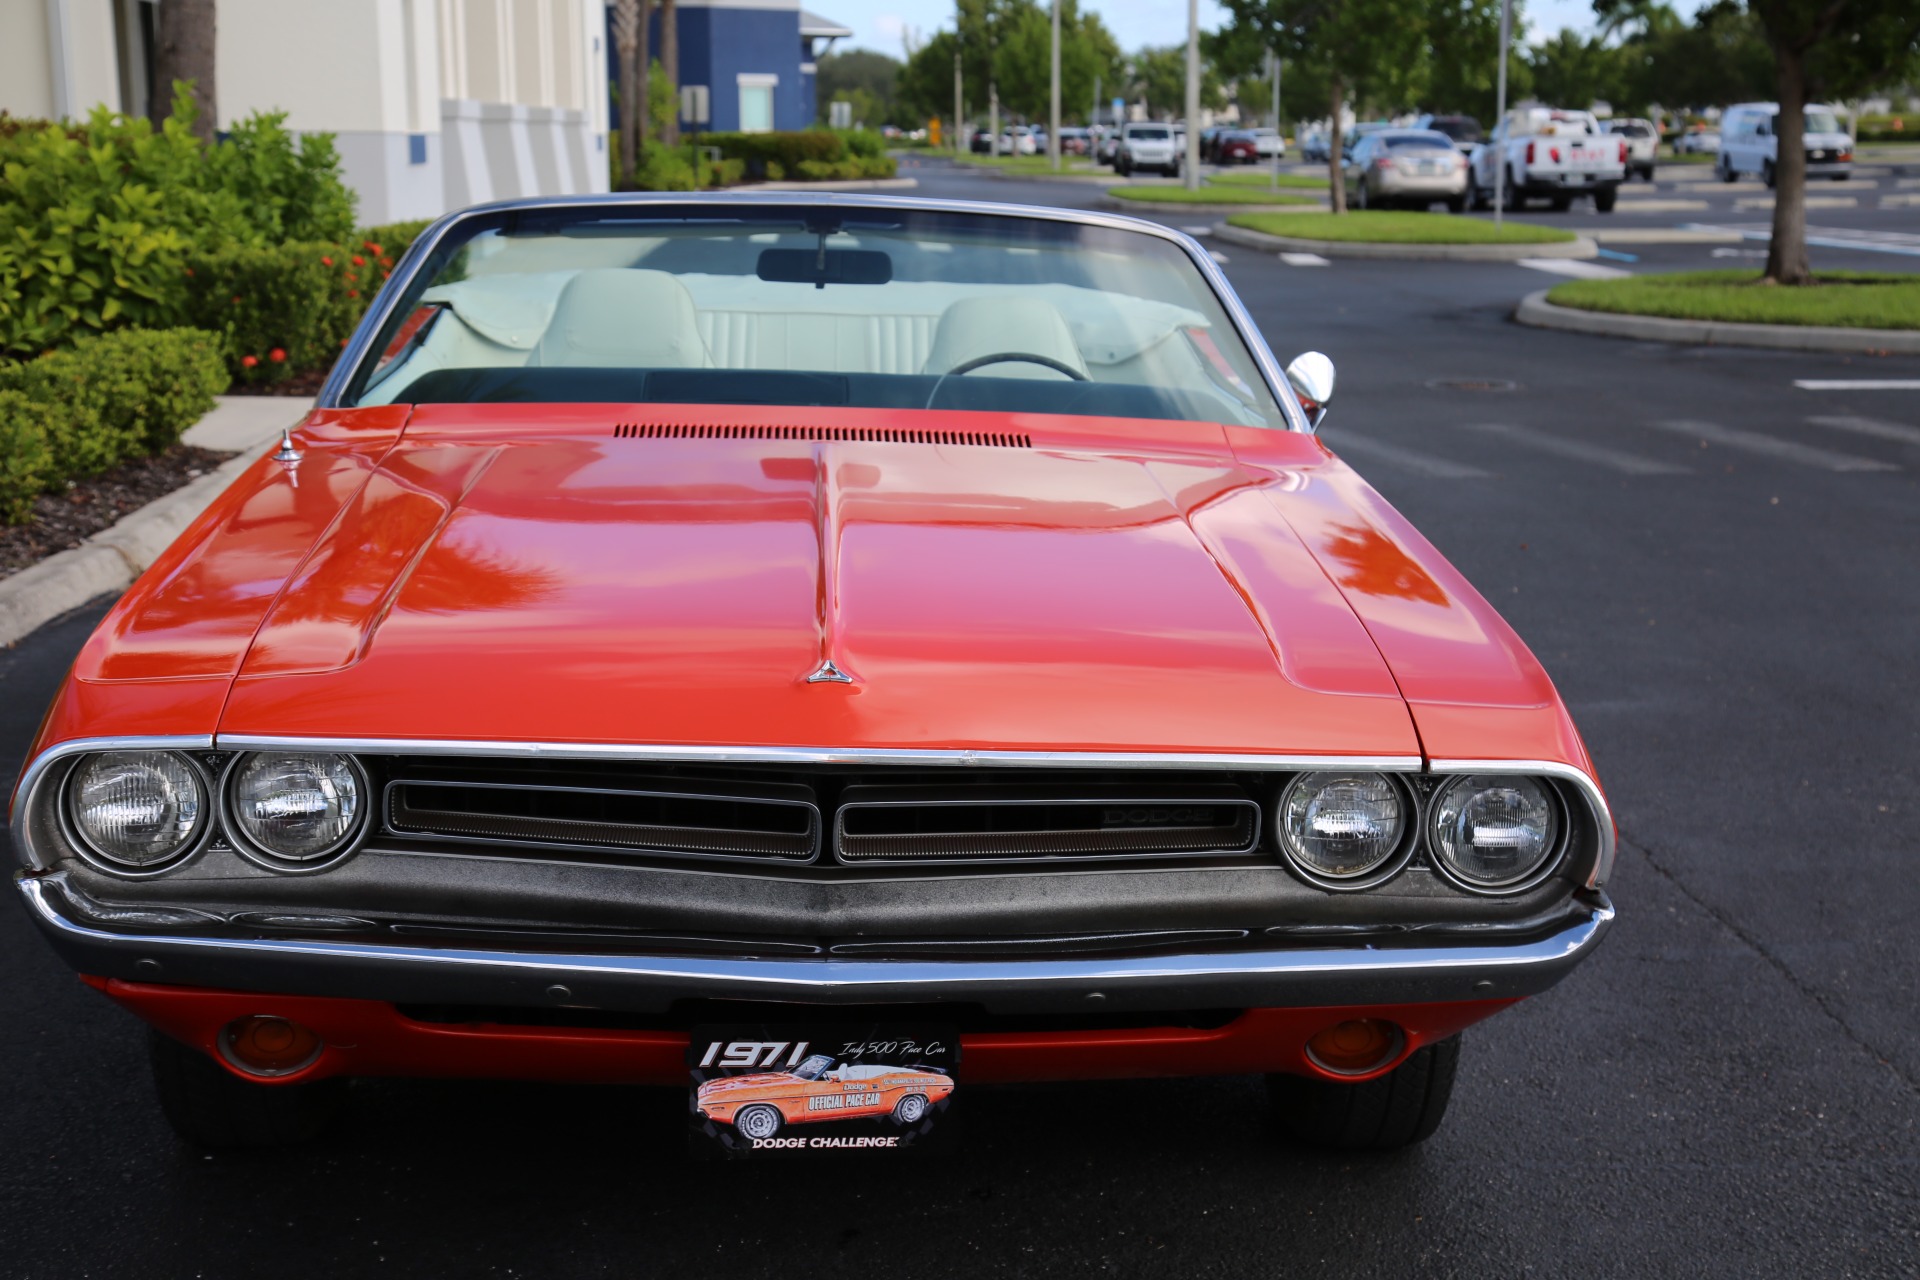 Used 1971 Dodge Challenger Convertible V8 Auto for sale $55,000 at Muscle Cars for Sale Inc. in Fort Myers FL 33912 2